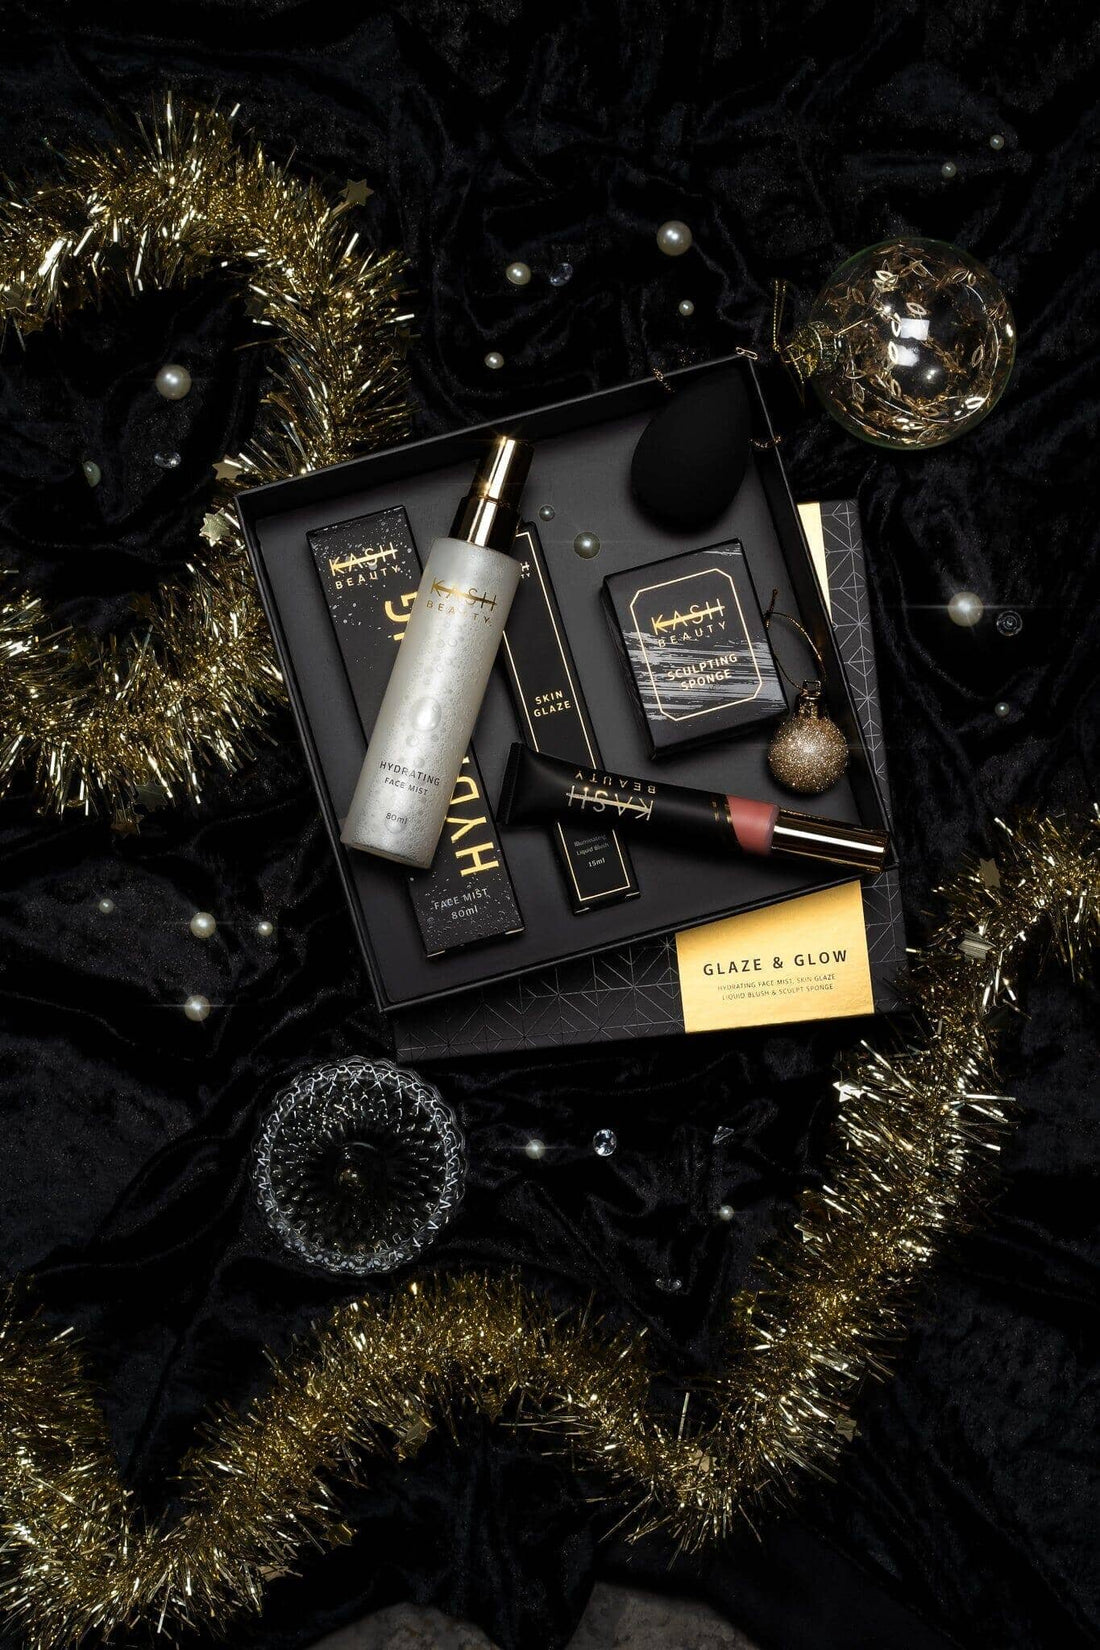 Kash Beauty unveils stunning collection of luxurious gift sets